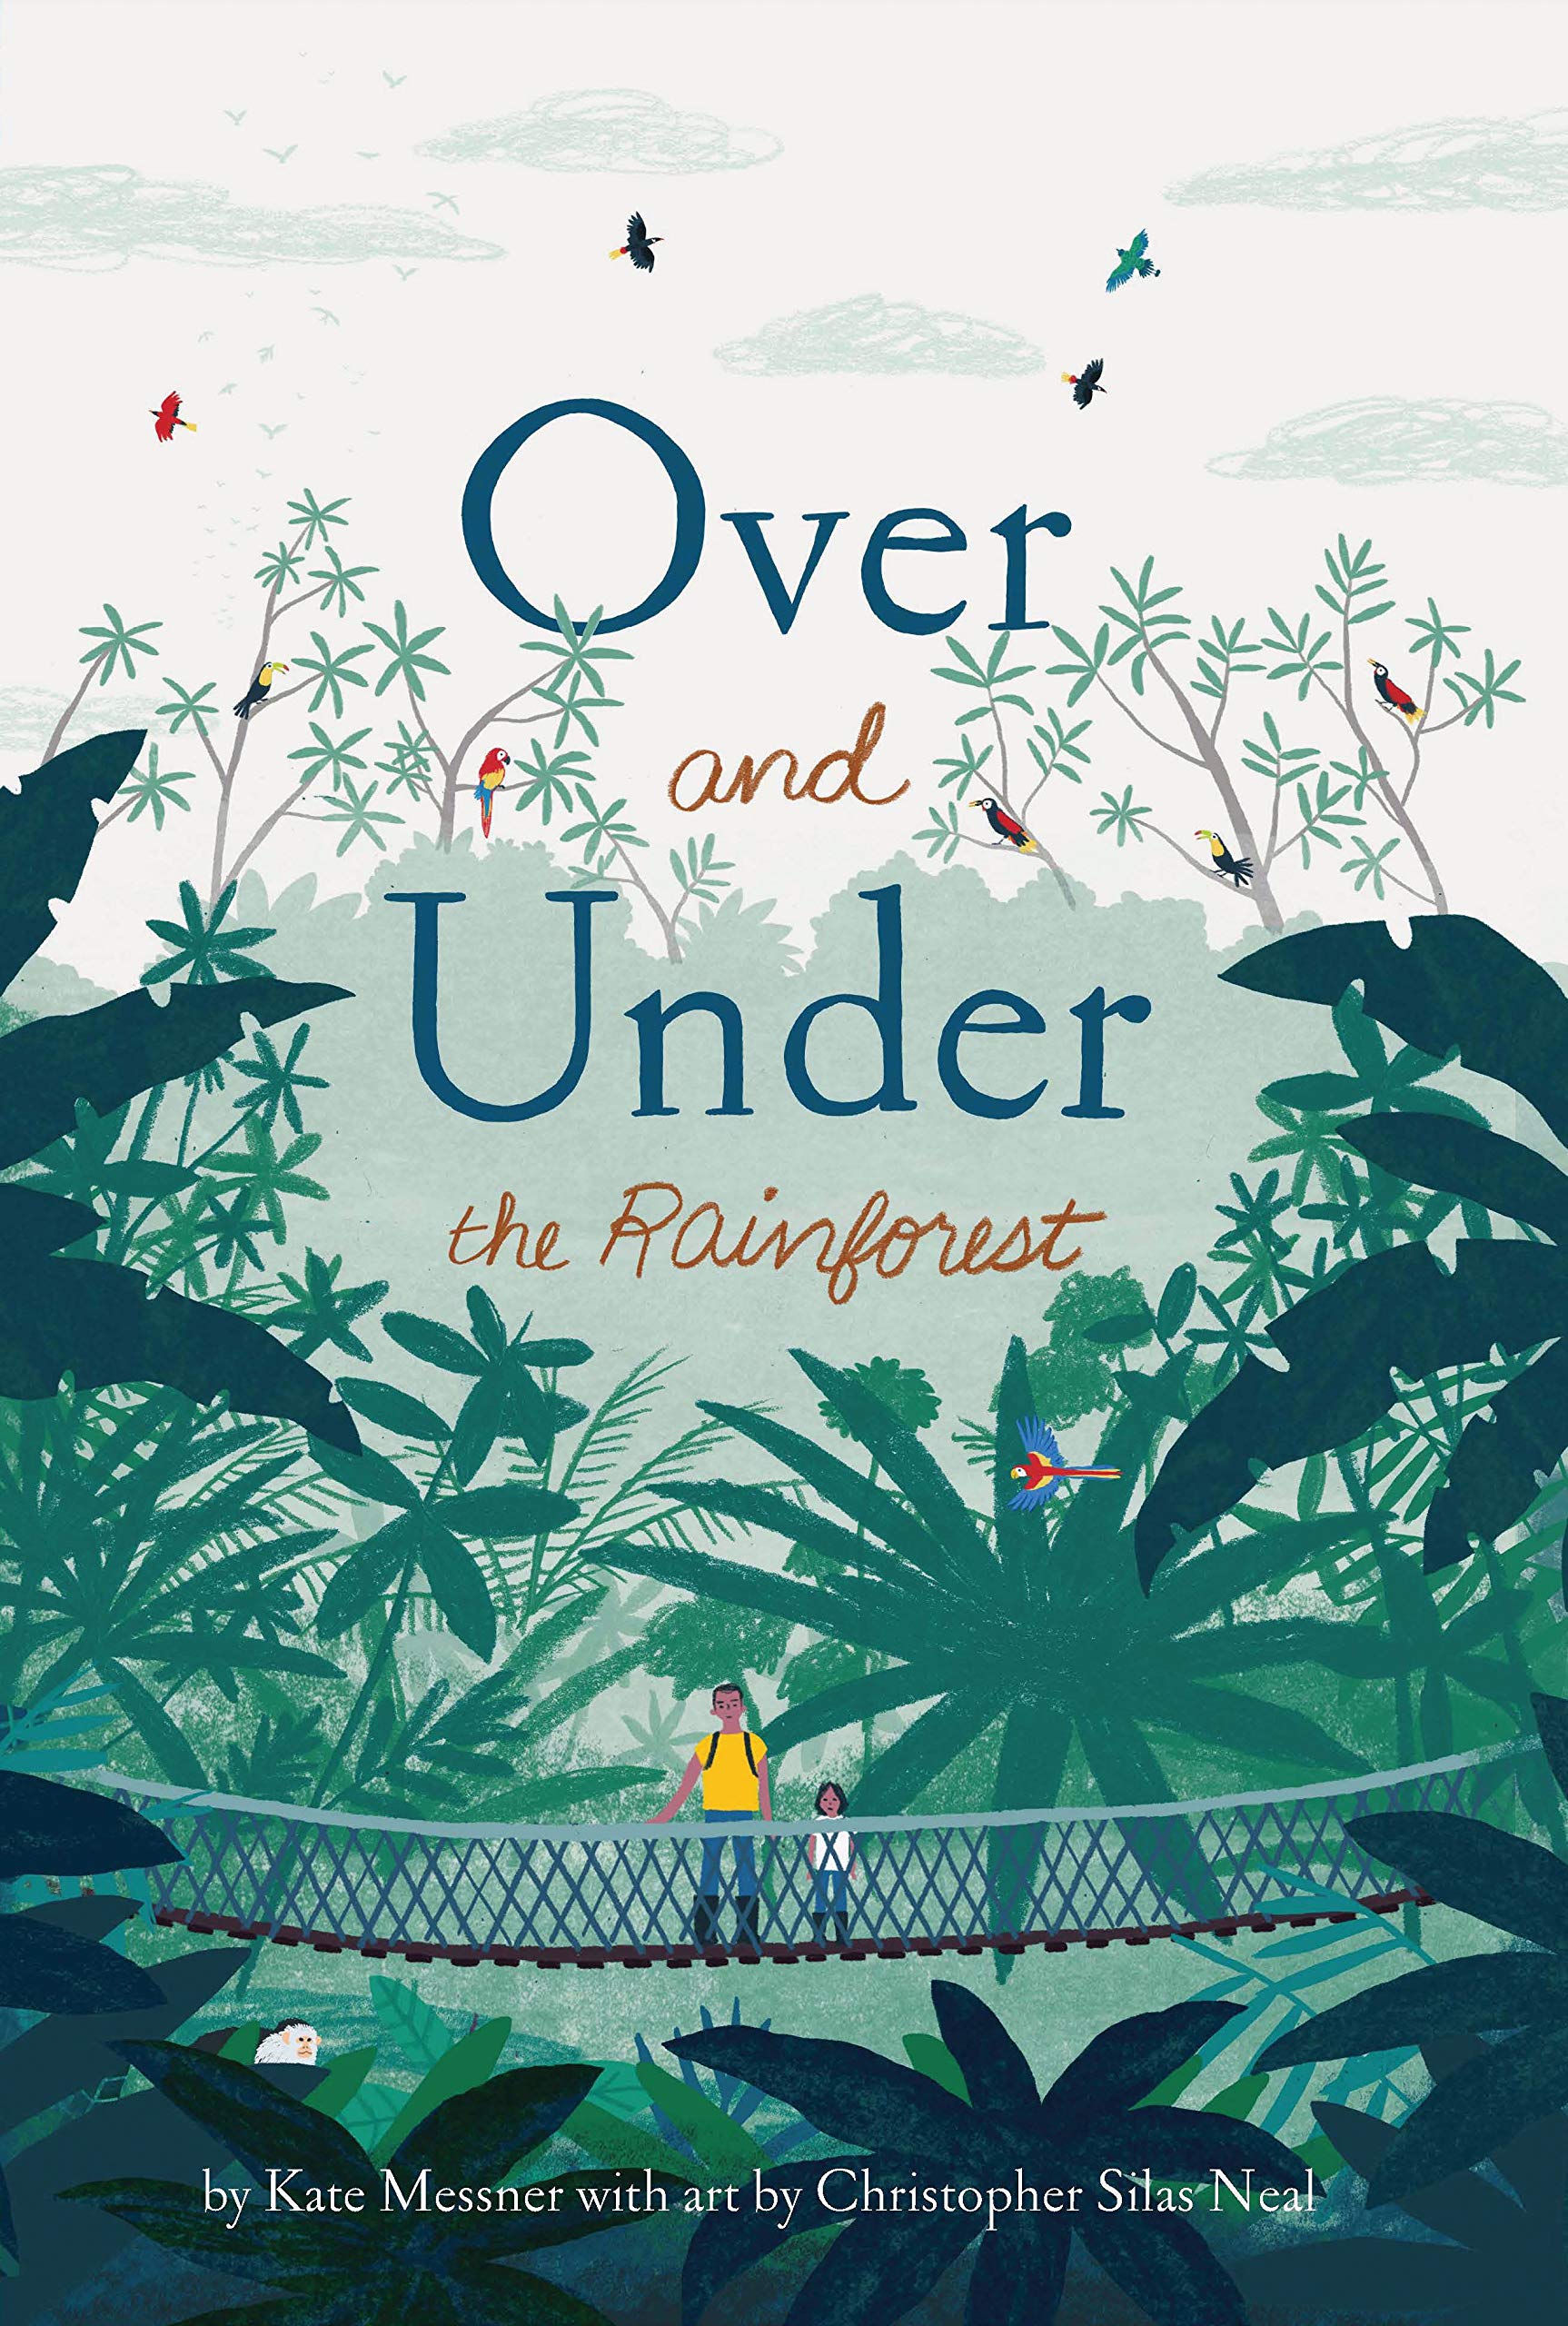 A picture book cover depicting two characters standing on a wooden bridge in a lush rainforest canopy giving way to sky.